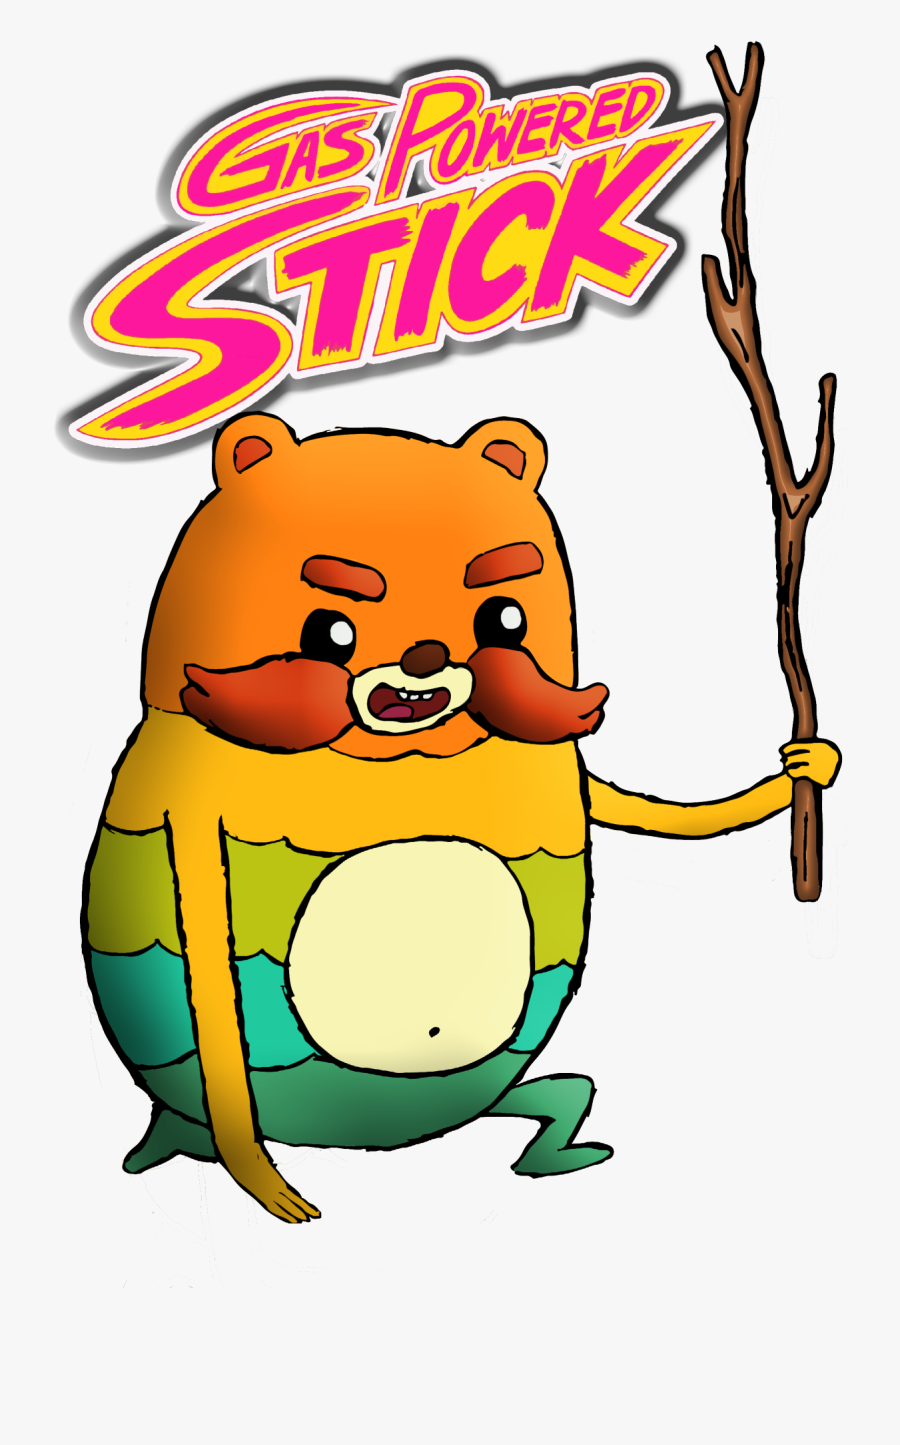 “ Impossibear 
”
impossibear From The Cartoon Hangover - Bravest Warriors Impossibear, Transparent Clipart